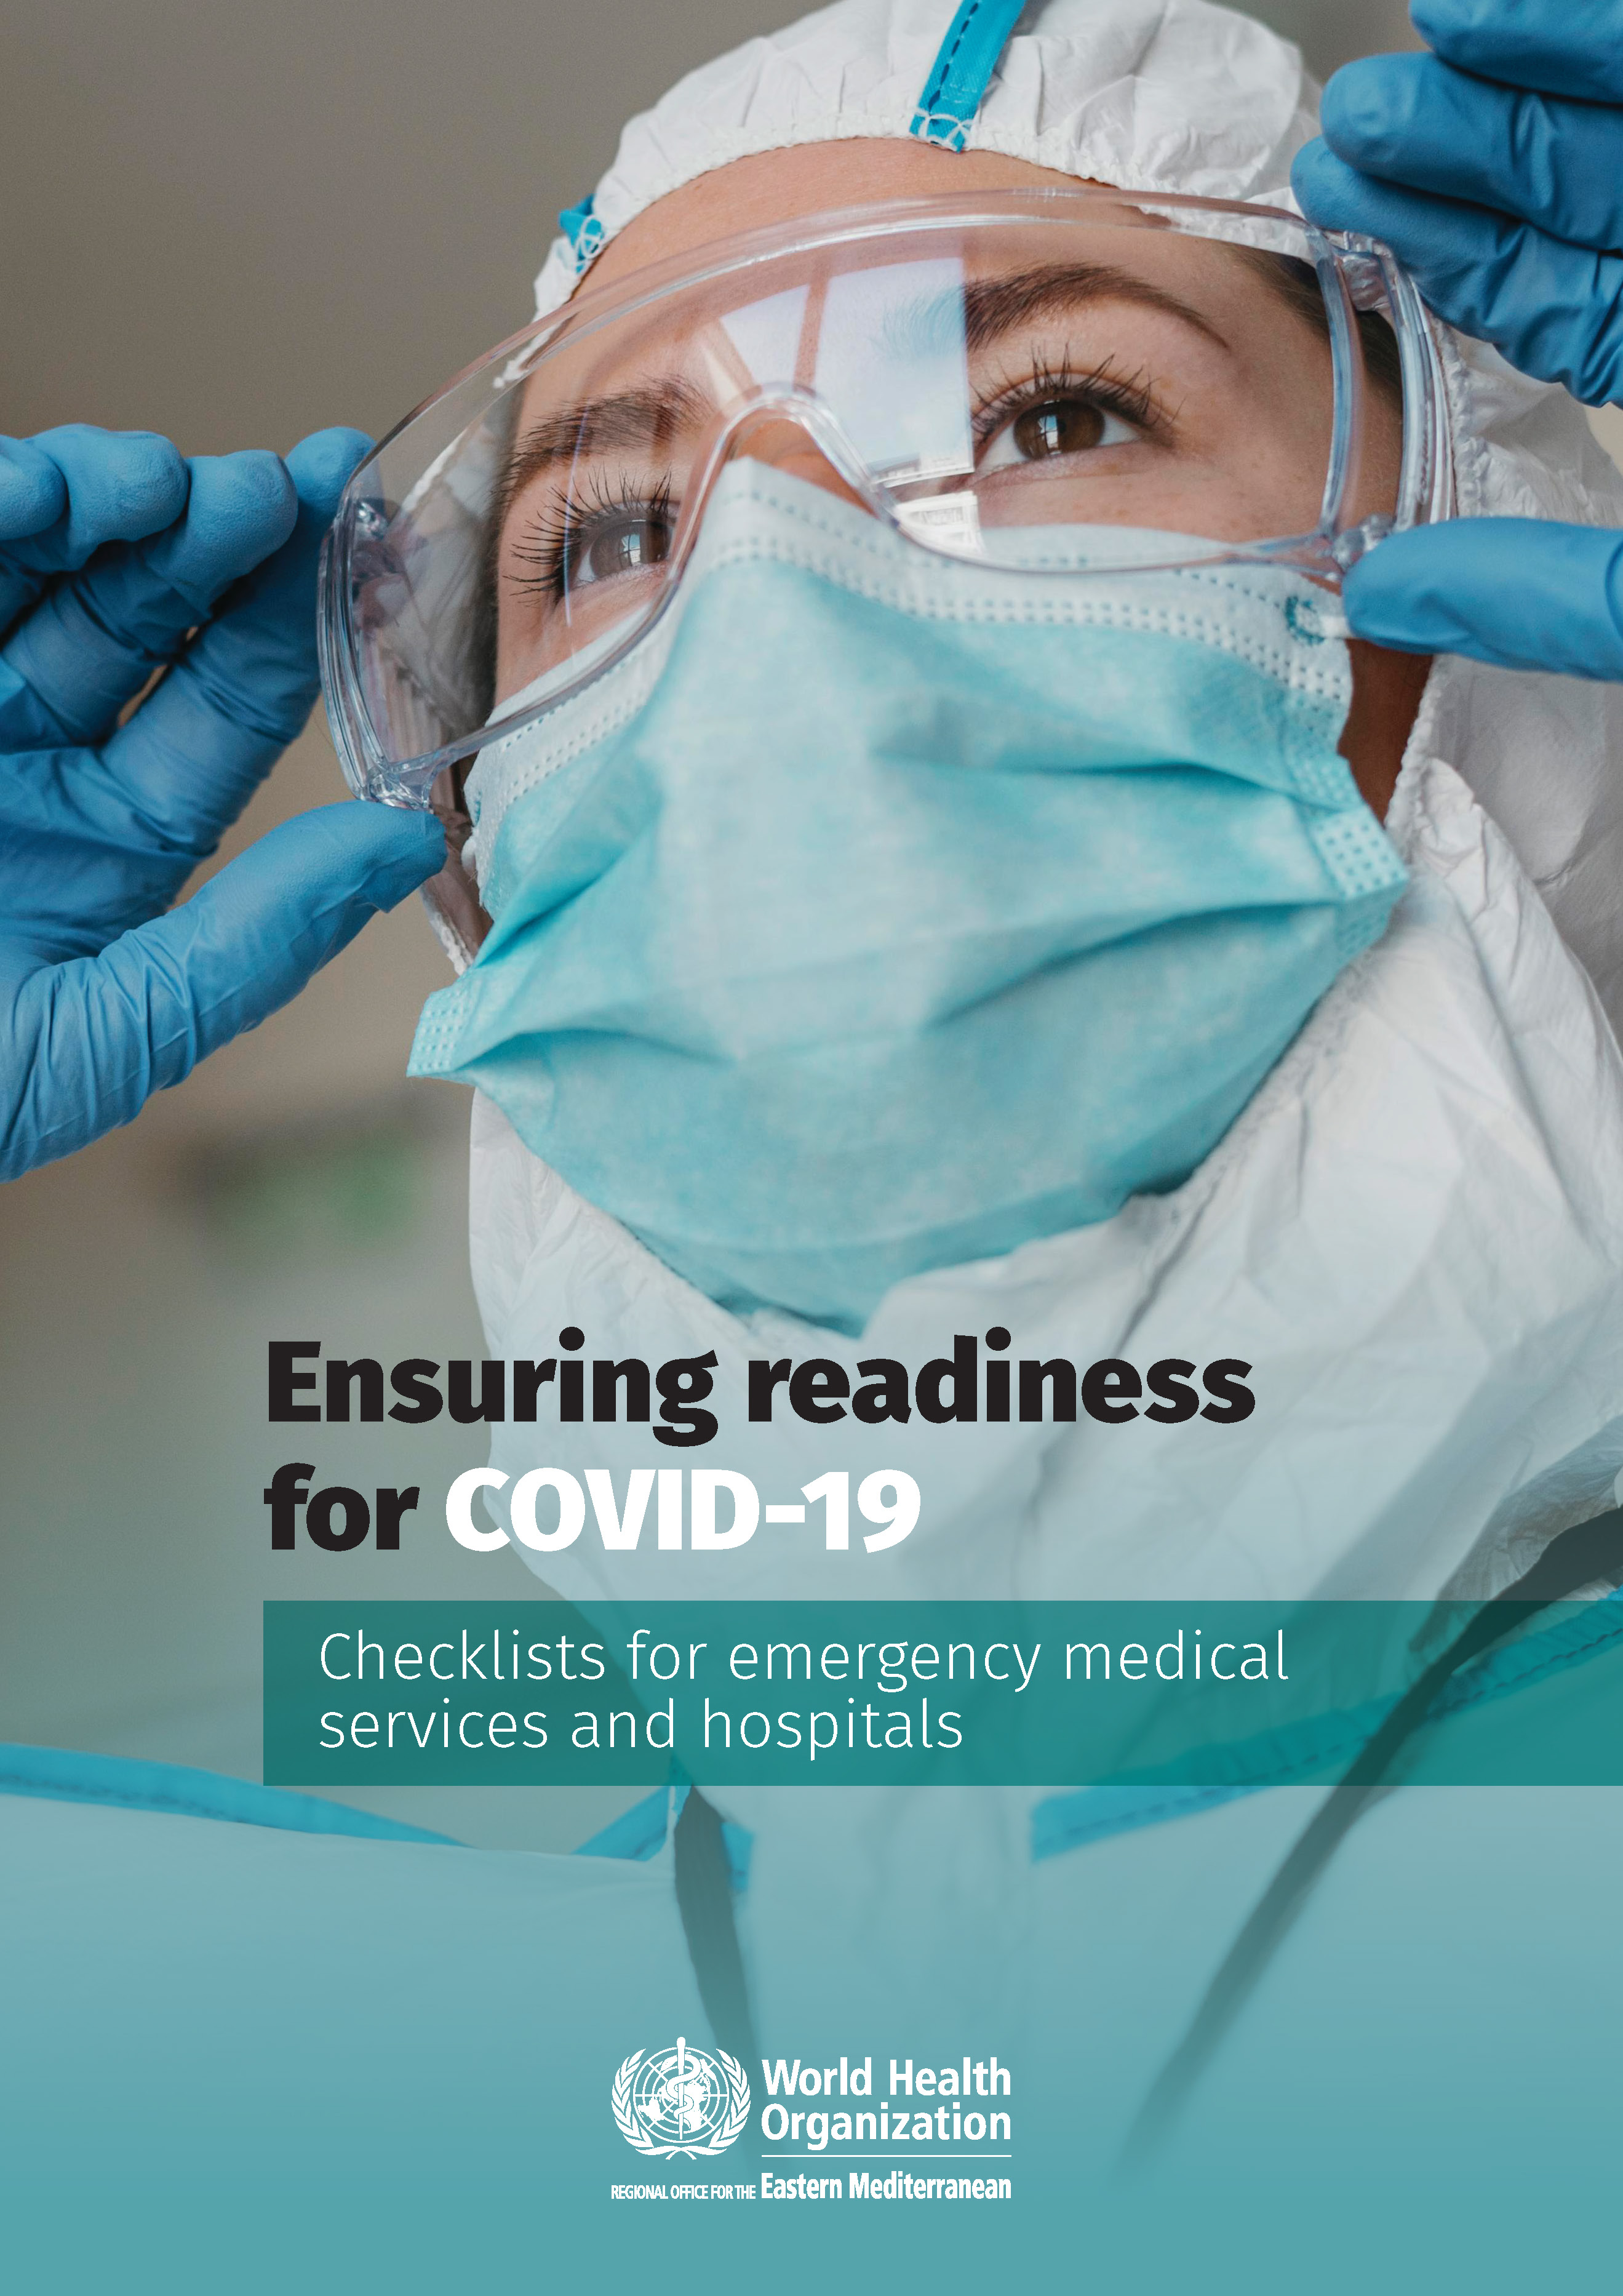 Ensuring readiness for COVID-19: checklists for emergency medical services and hospitals